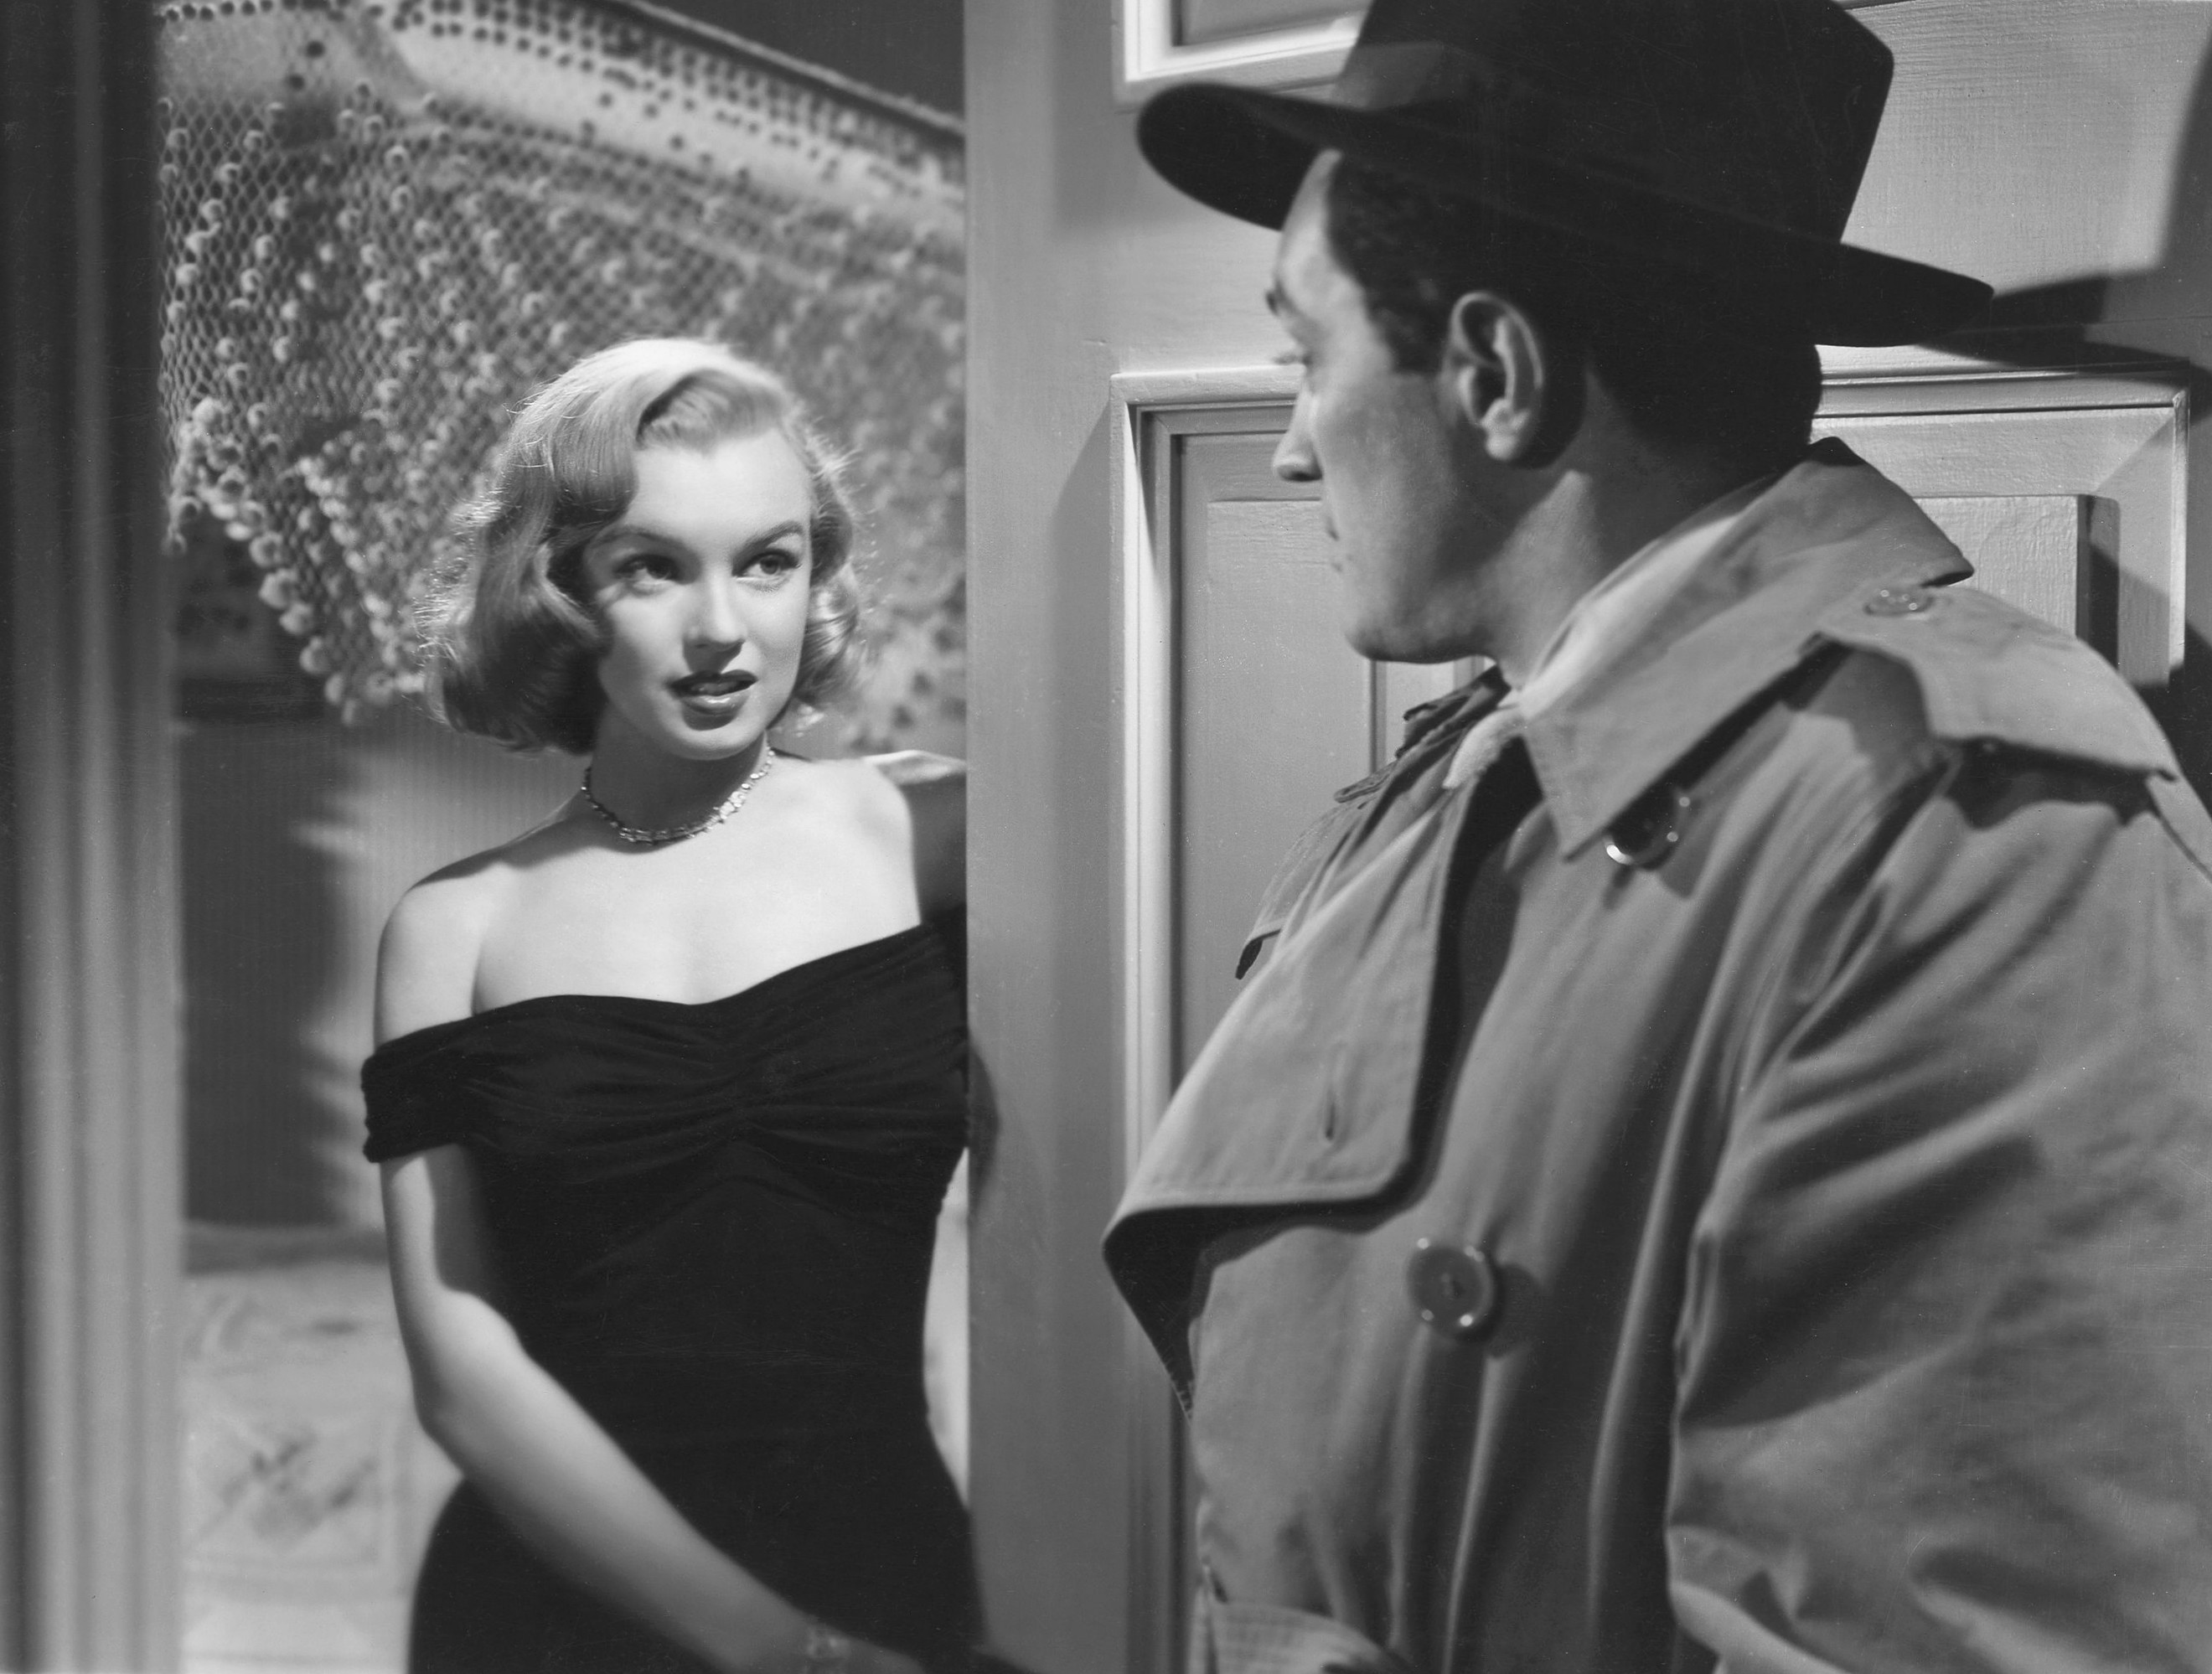 2640x1998 Asphalt Jungle, one of the best film noir movies of all time!